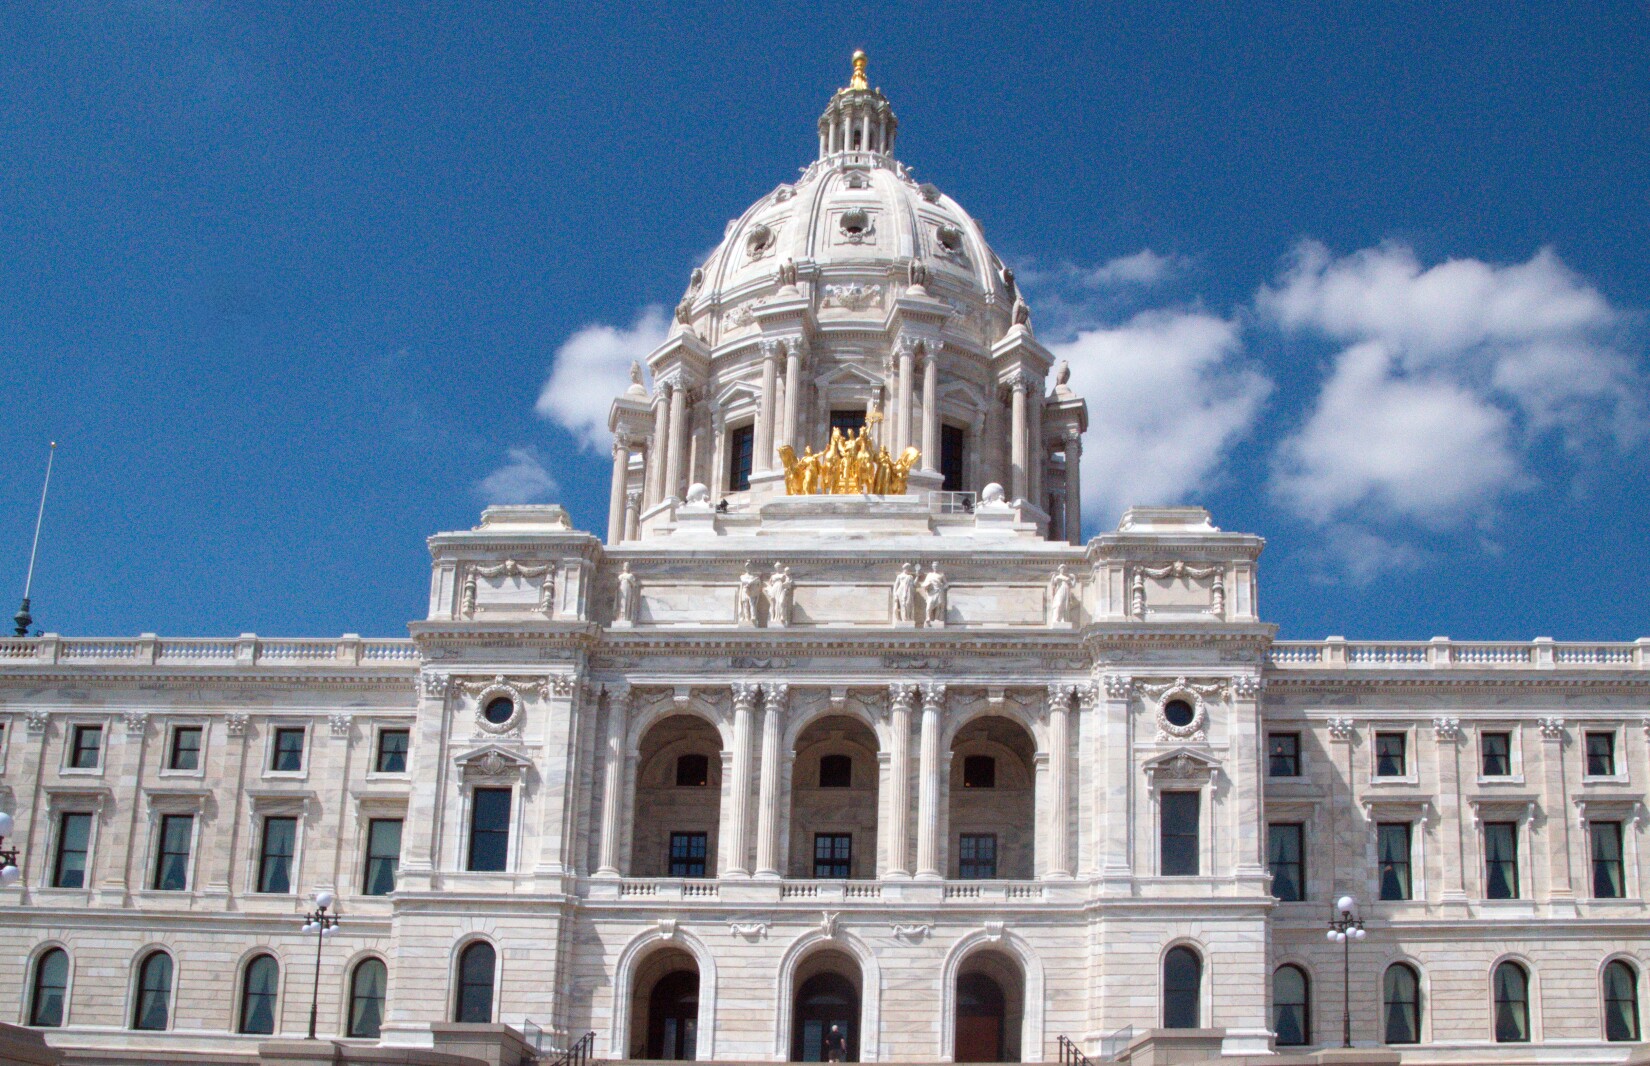  Minnesota Opinion: For the good of Minnesota, call a special session 